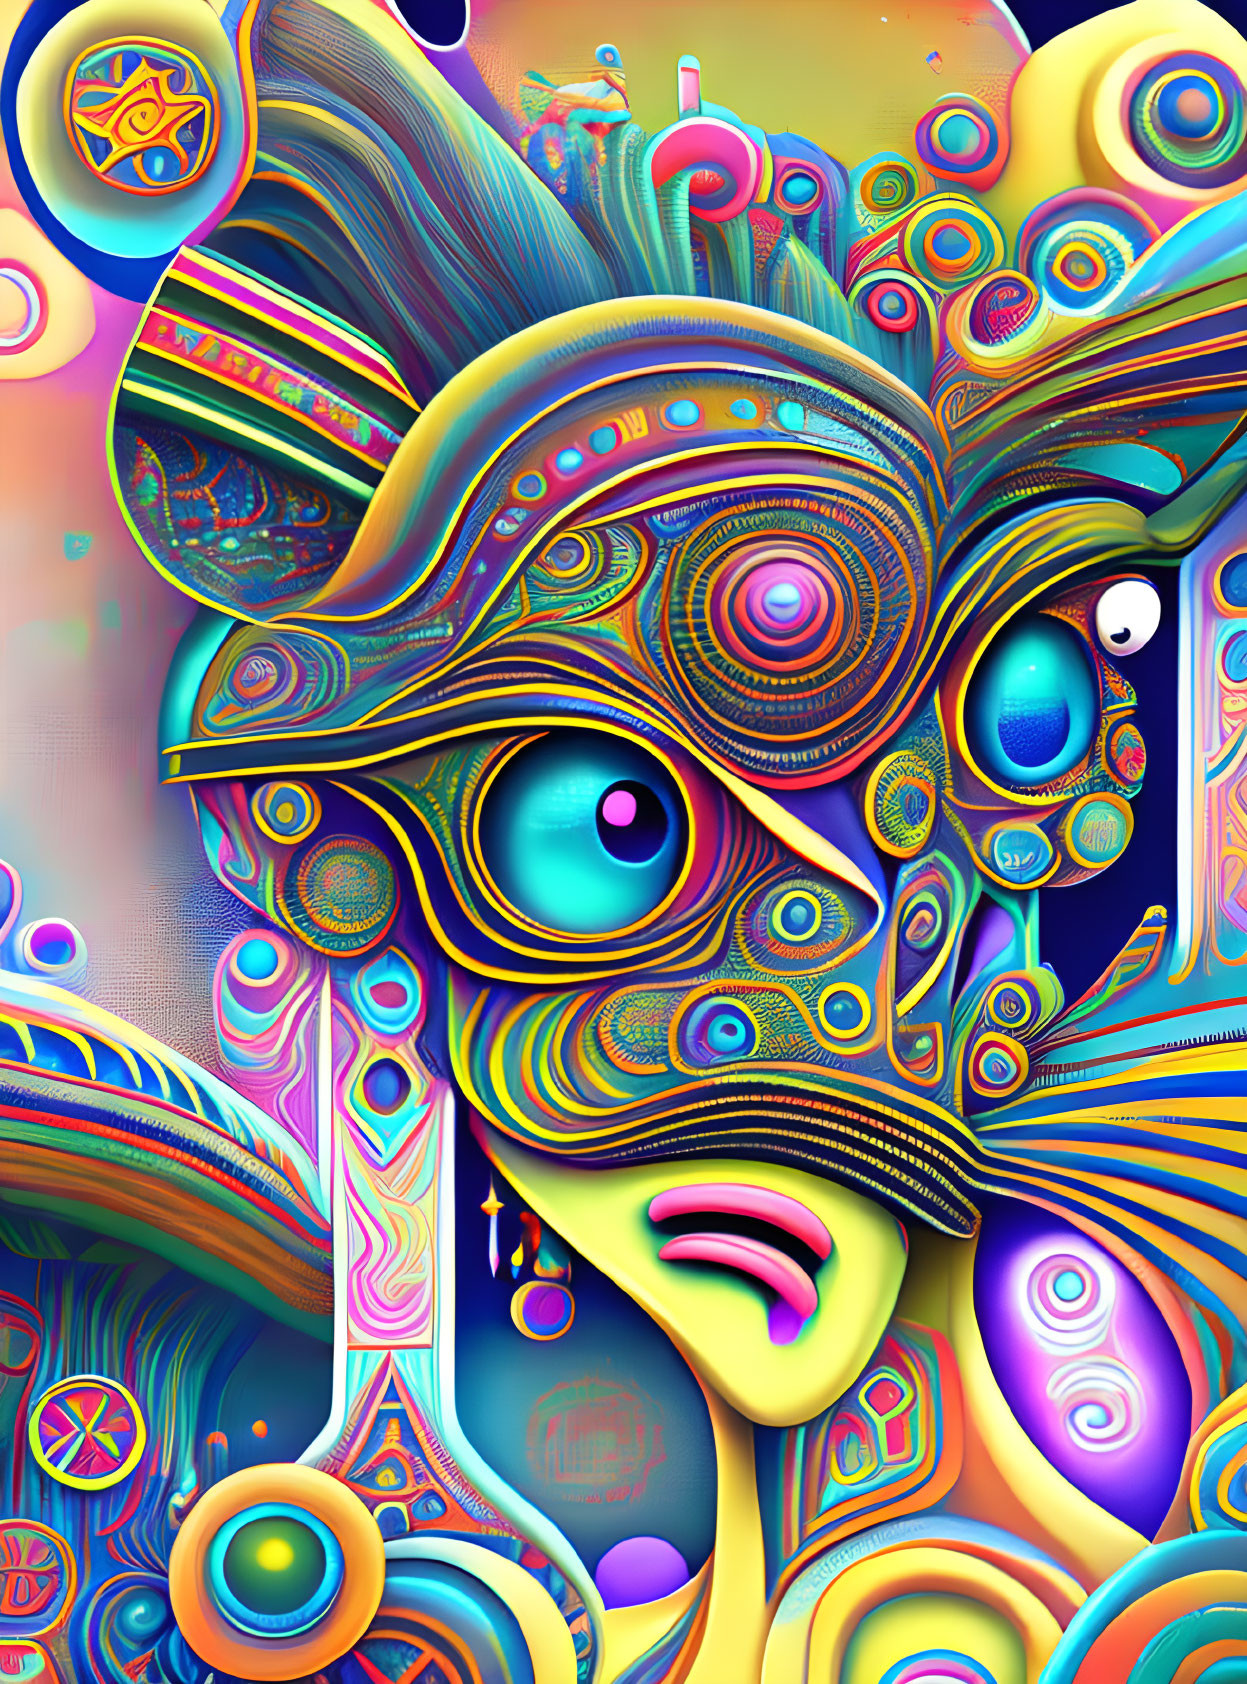 Colorful Abstract Face Artwork with Psychedelic Patterns